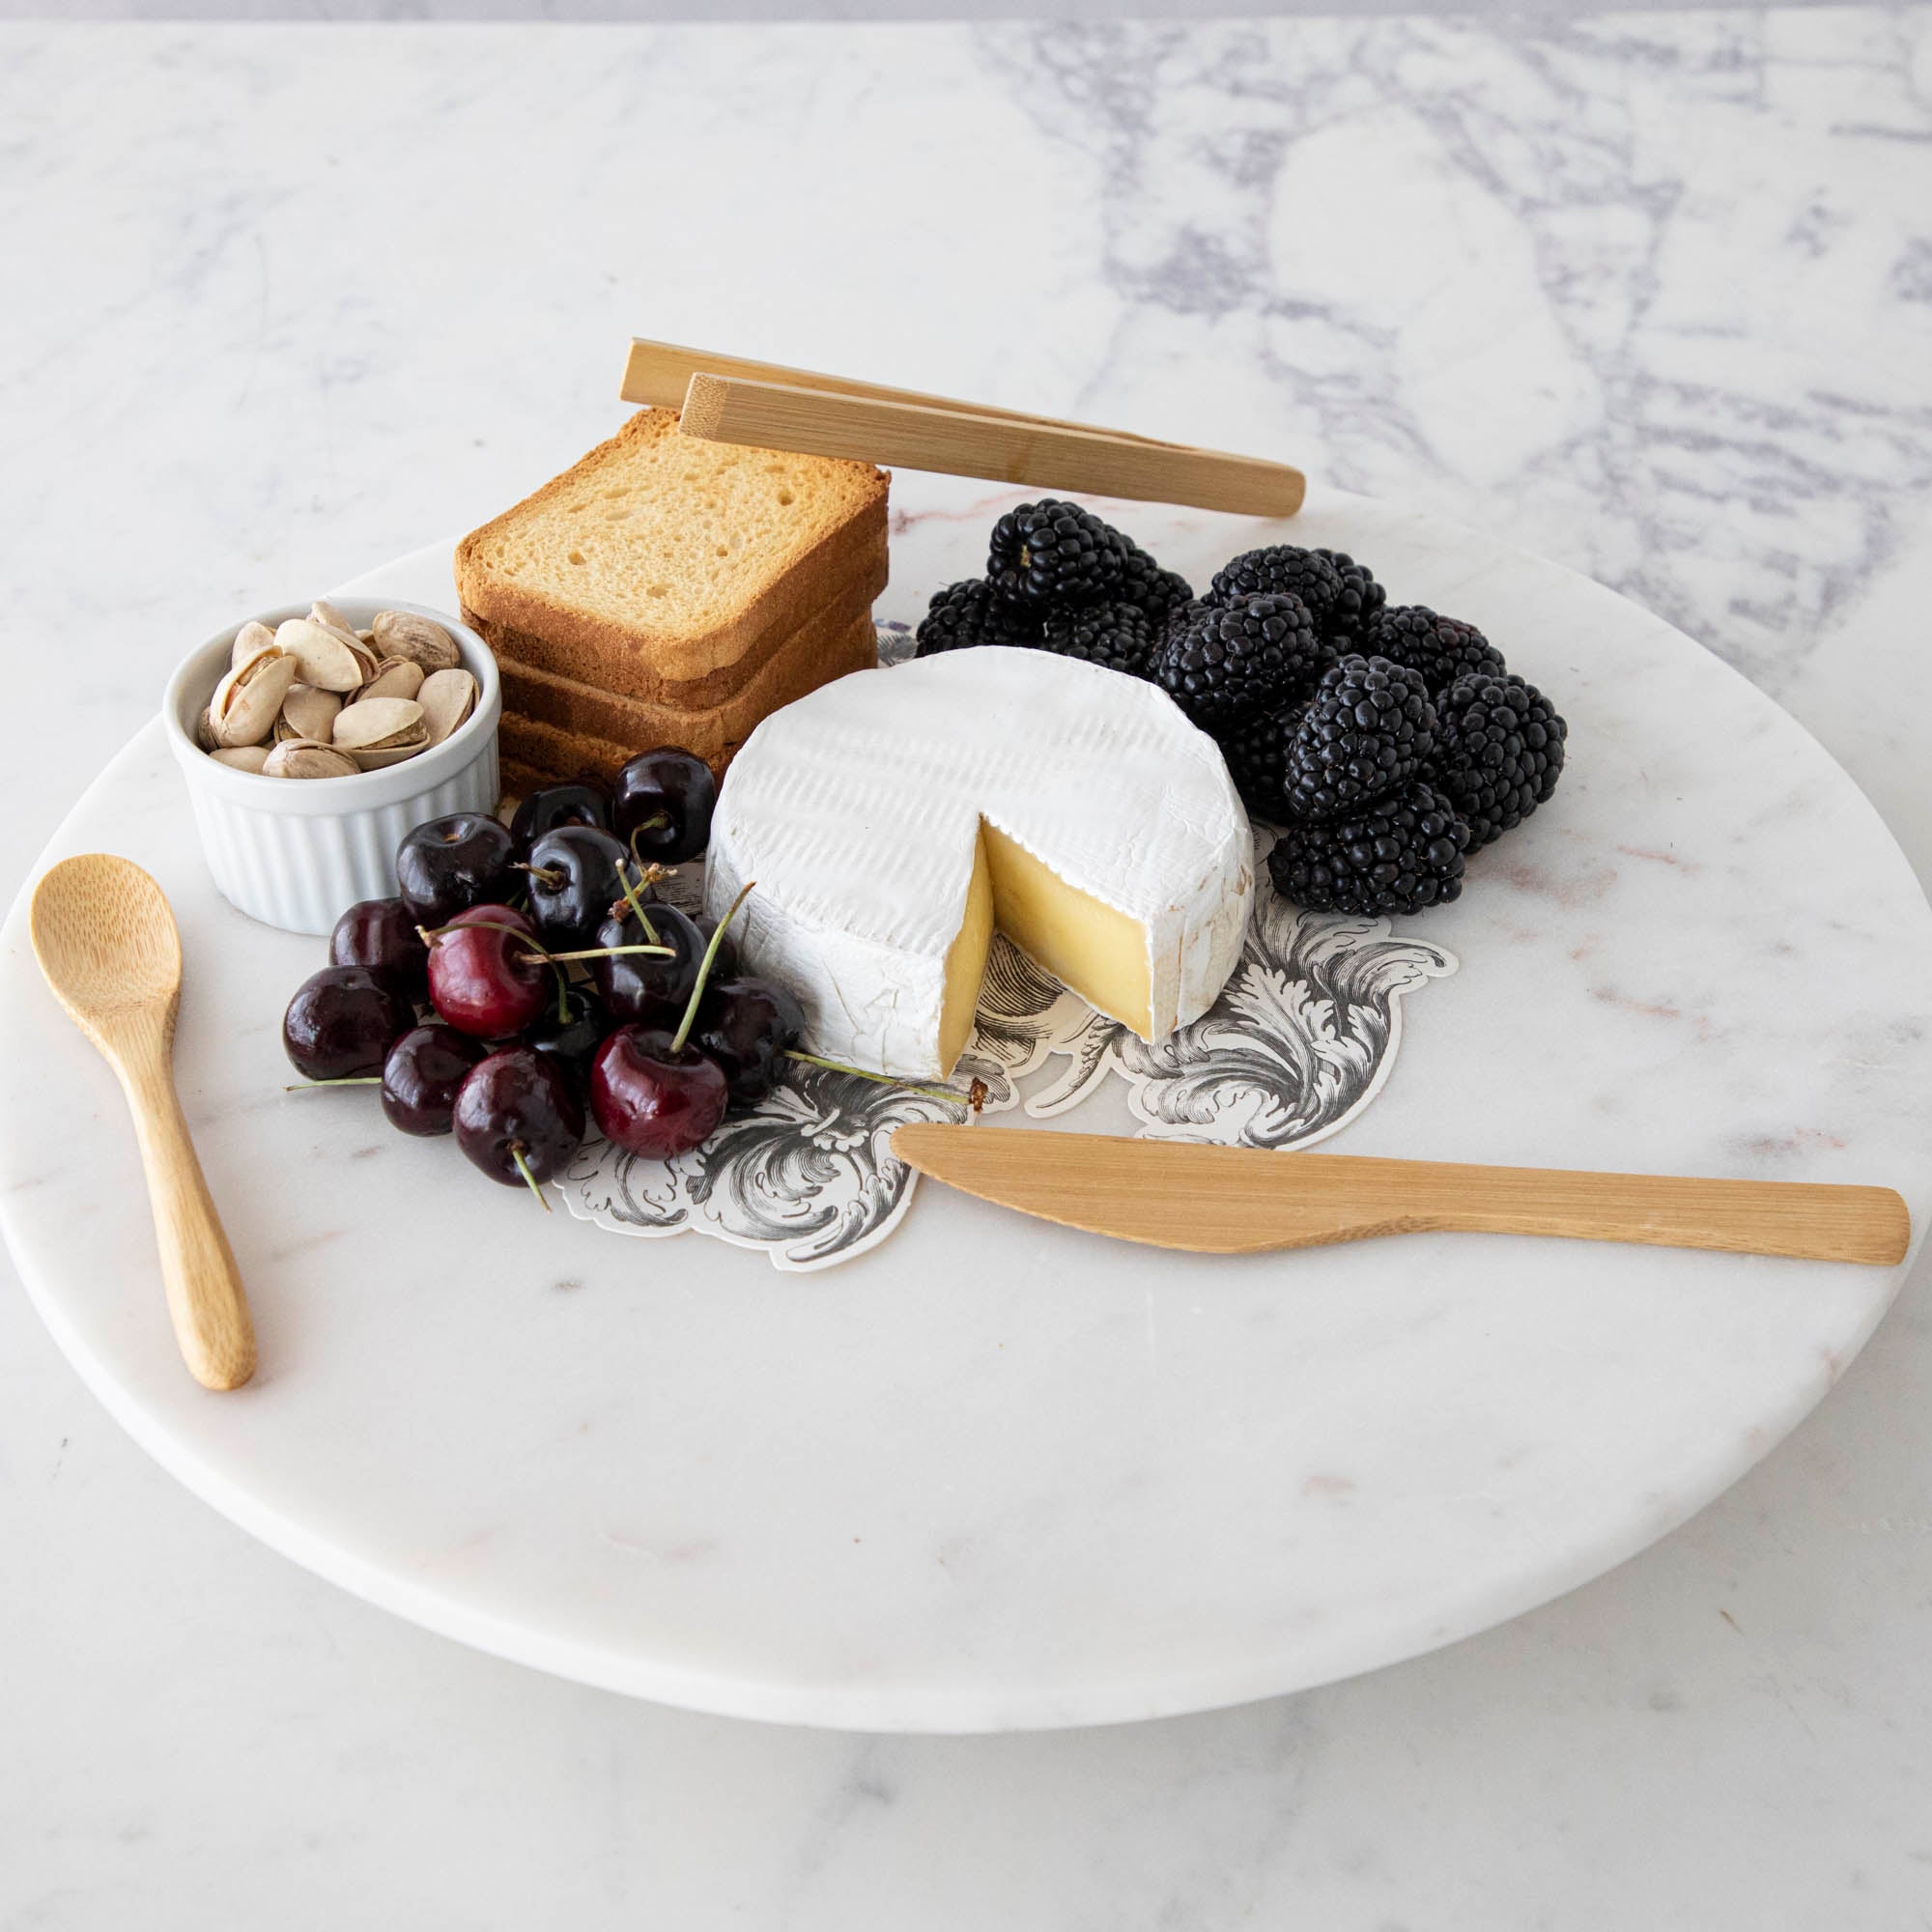 A plate with cheese, fruit, and nuts on it, served with BIA Mini Bamboo Utensils.